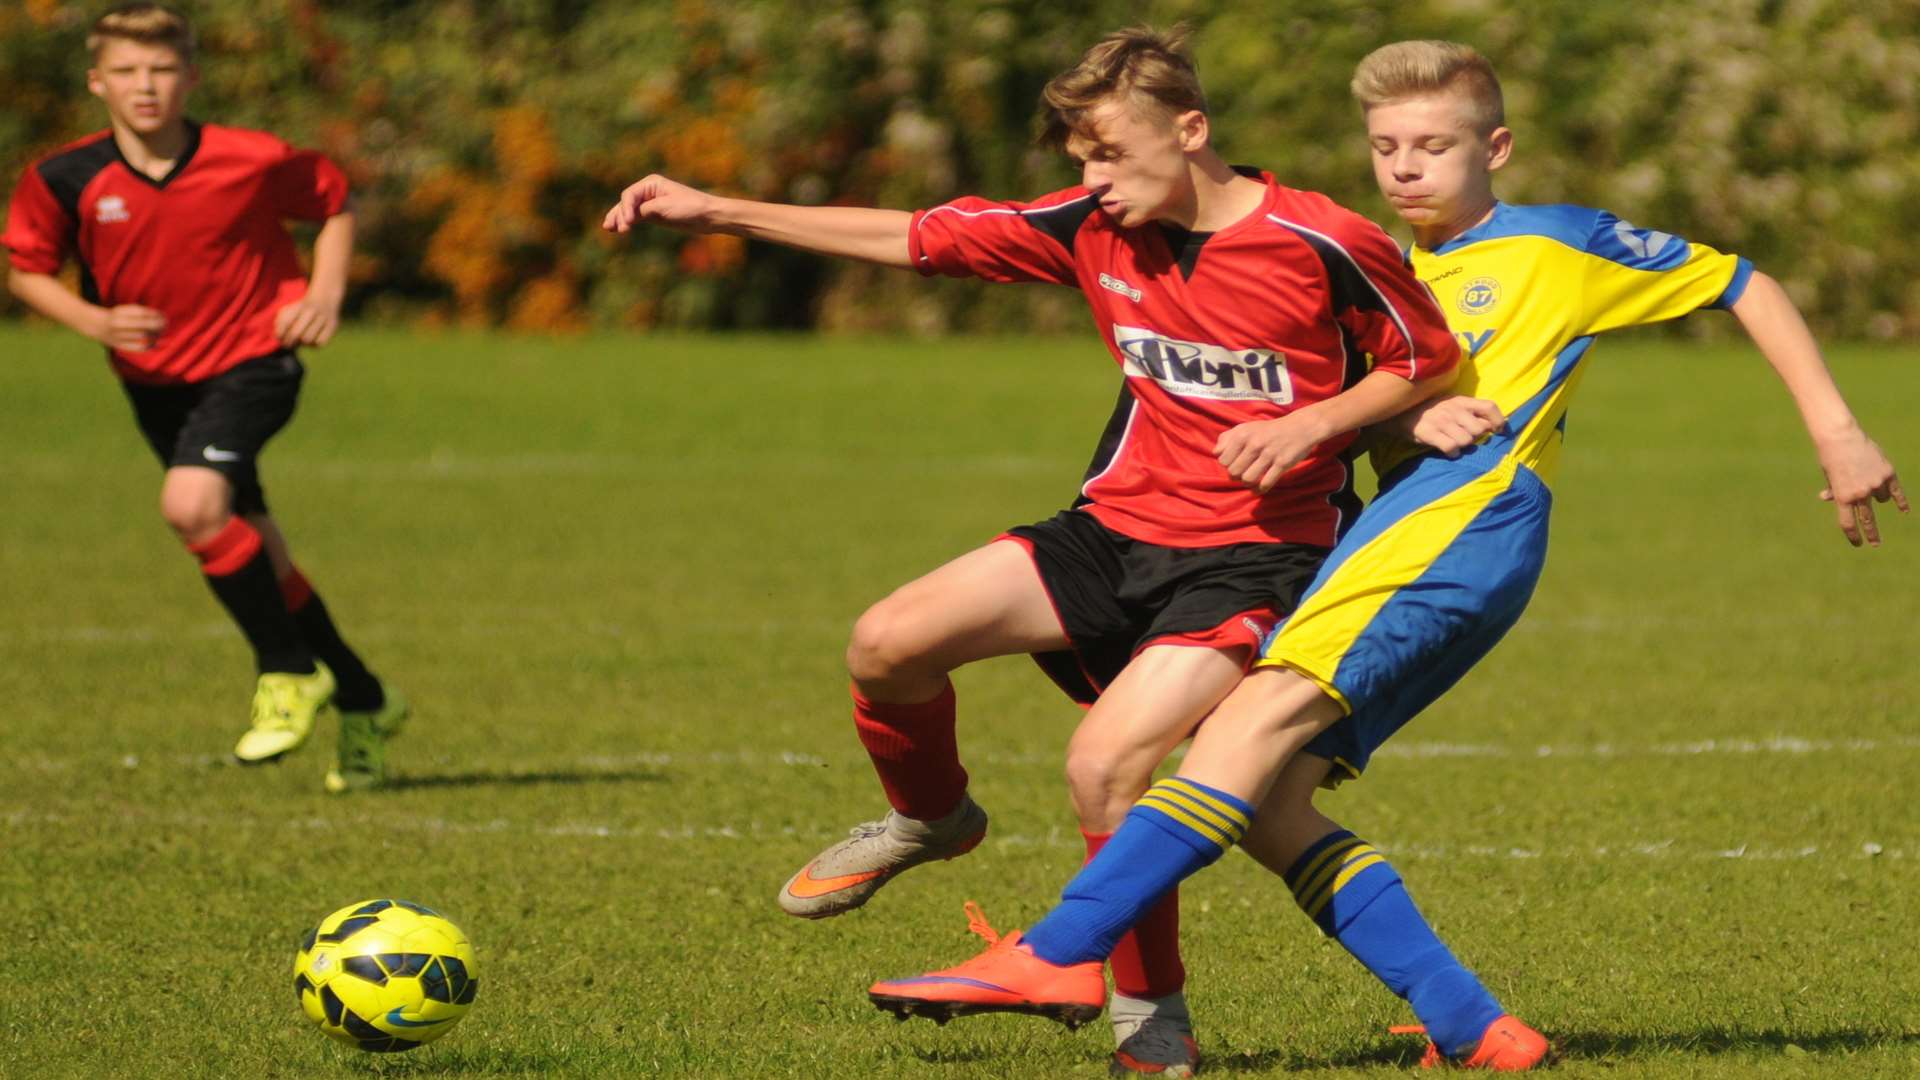 Rainham Kenilworth under-15s hold off Strood 87 in their League Cup clash Picture: Steve Crispe